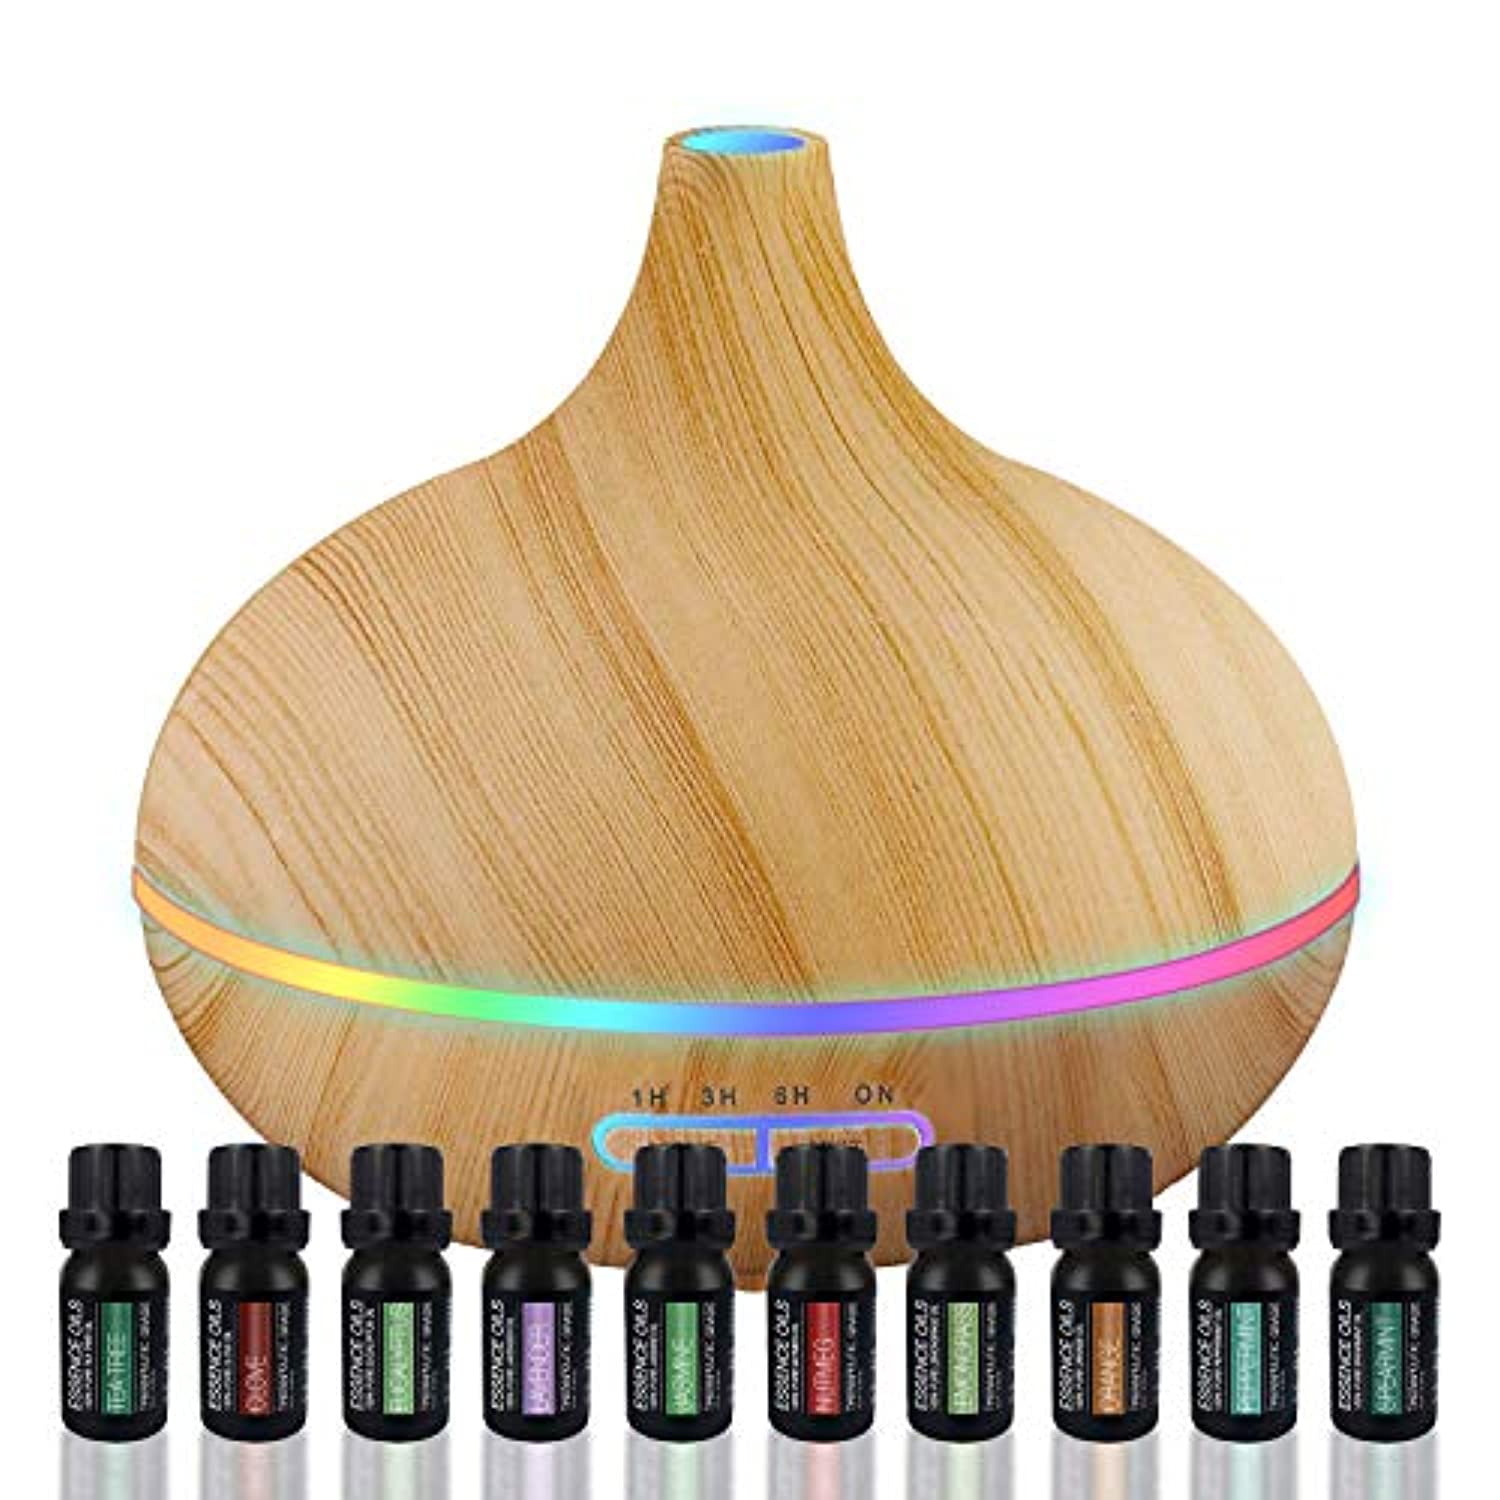 Ultimate Aromatherapy Diffuser & Essential Oil Set - Ultrasonic Diffuser & Top